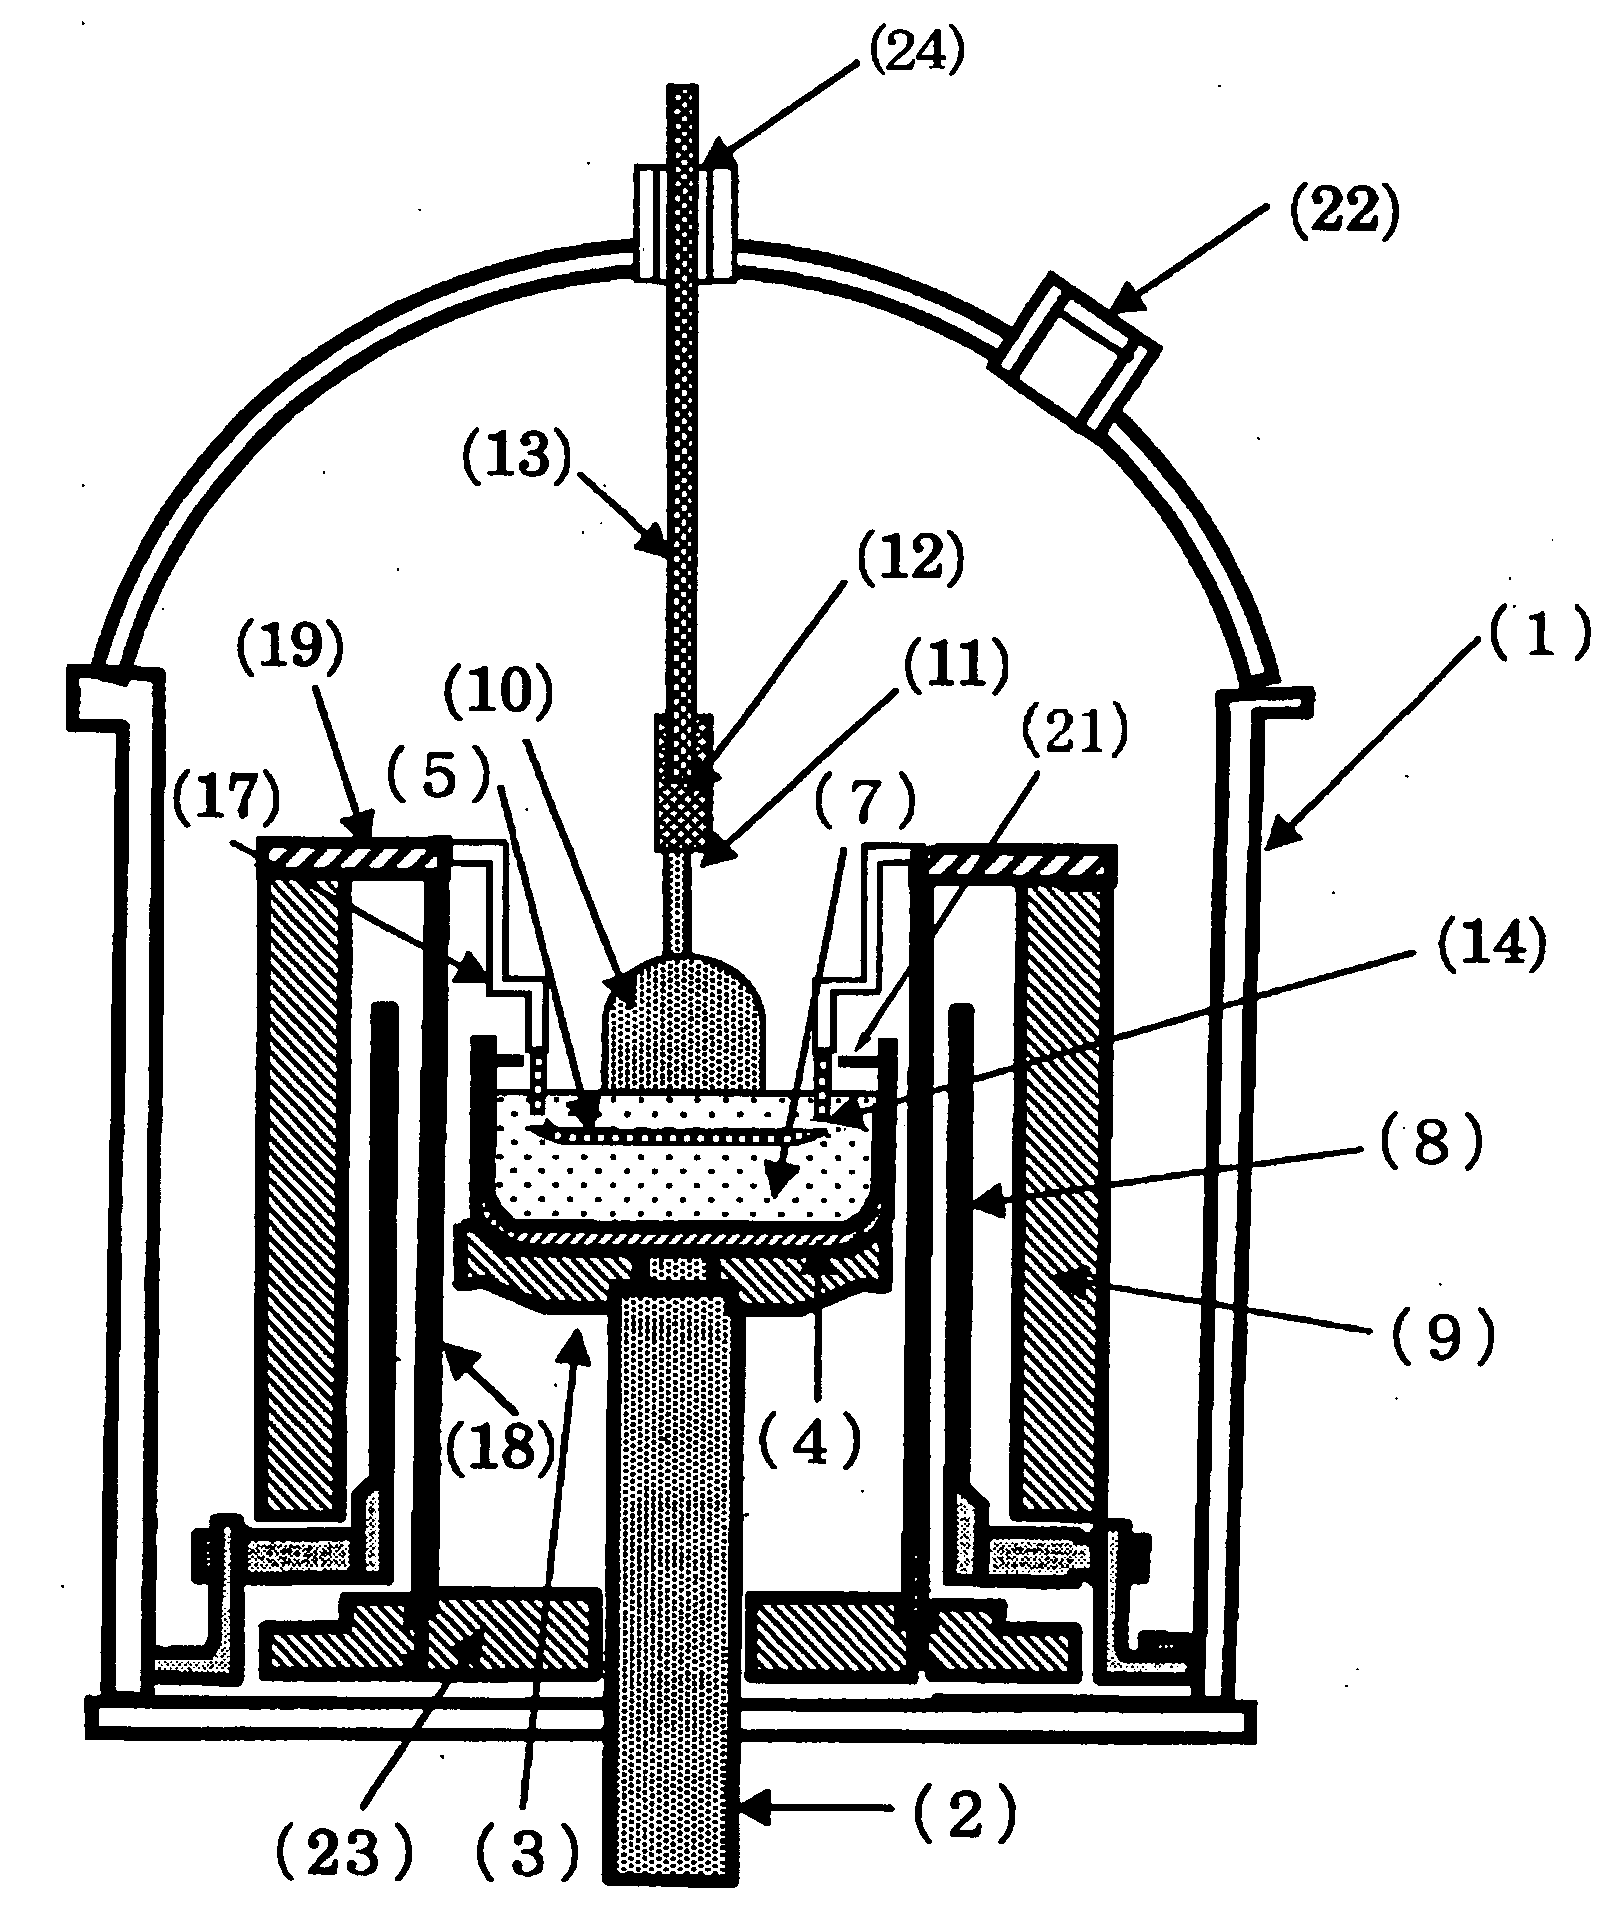 Metal Fluoride Single Crystal Pulling Apparatus and Process for Producing Metal Fluoride Single Crystal With the Apparatus